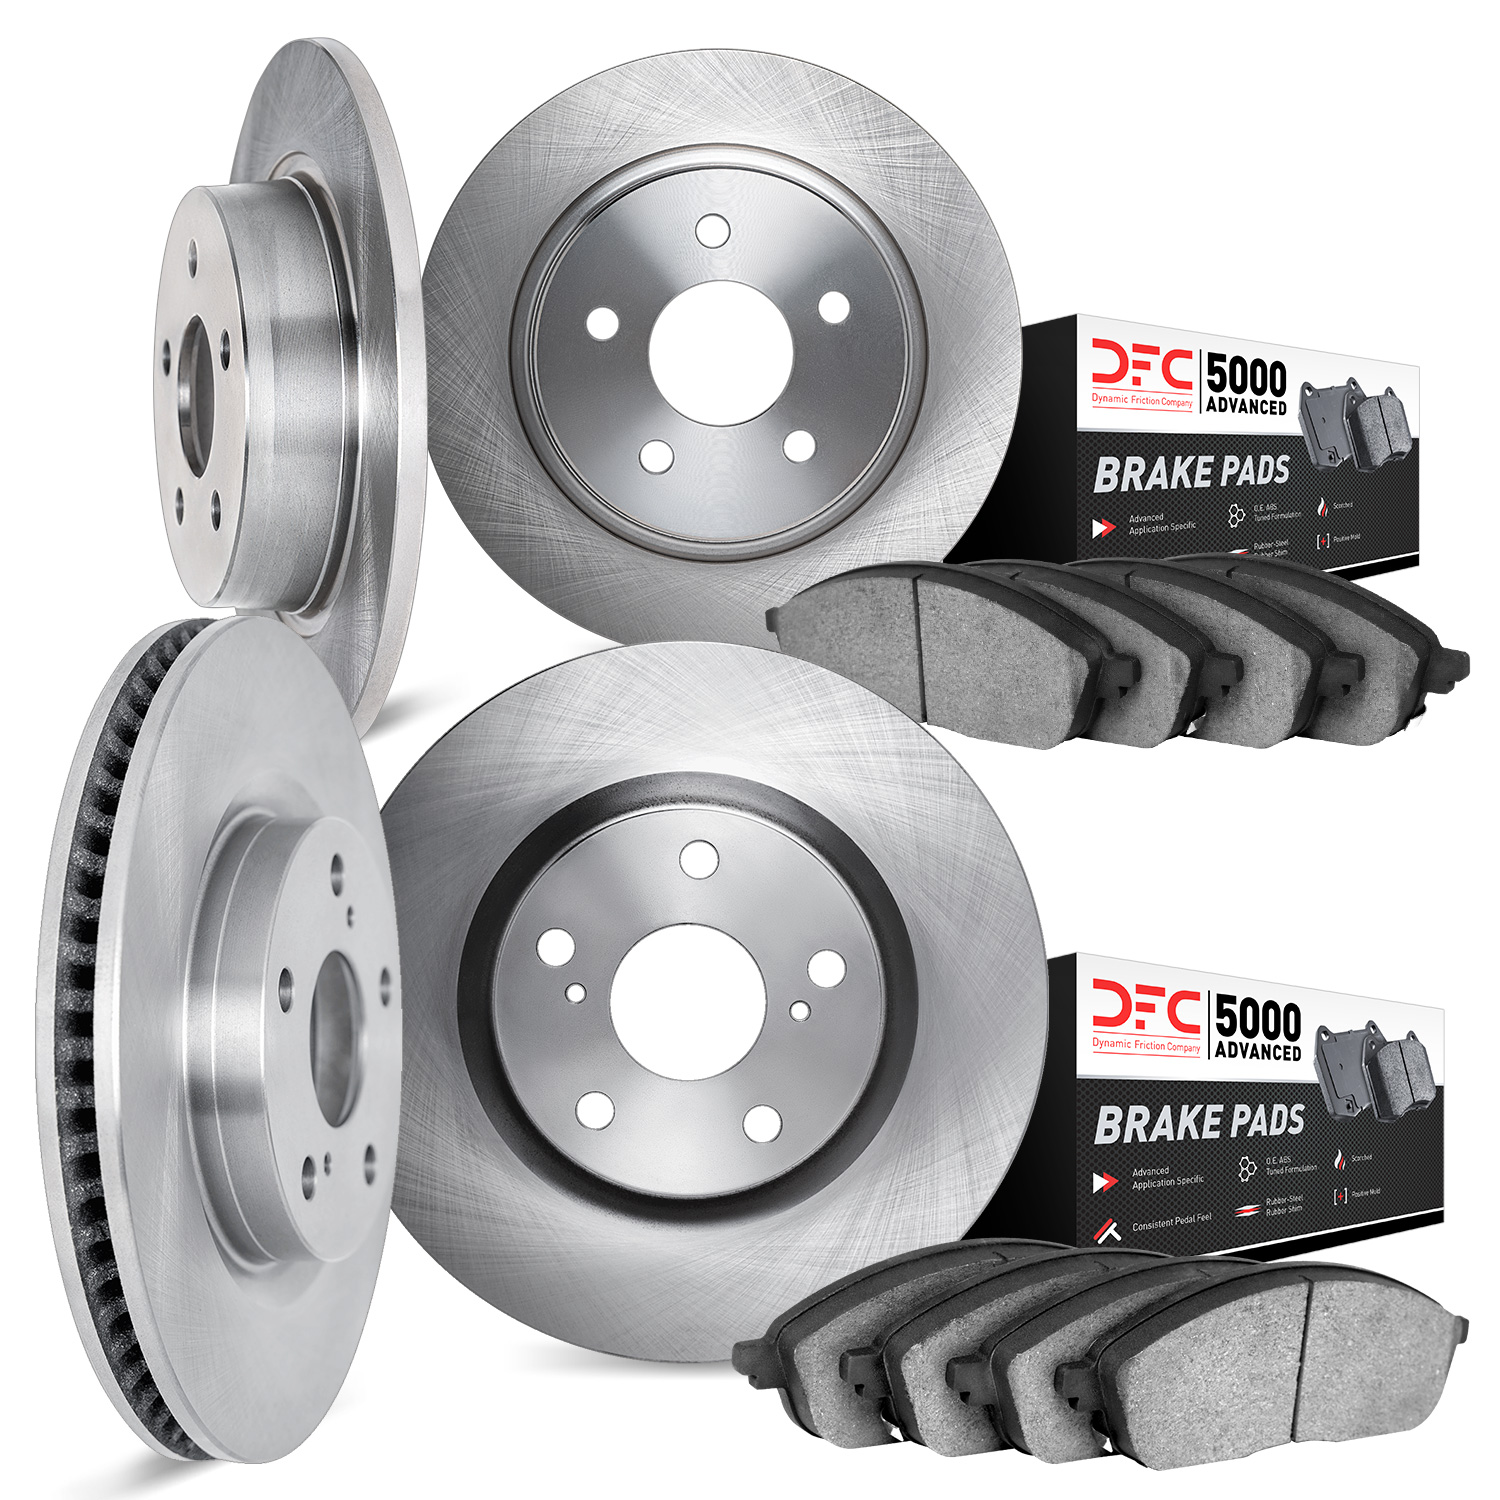 6504-45056 Brake Rotors w/5000 Advanced Brake Pads Kit, Fits Select GM, Position: Front and Rear